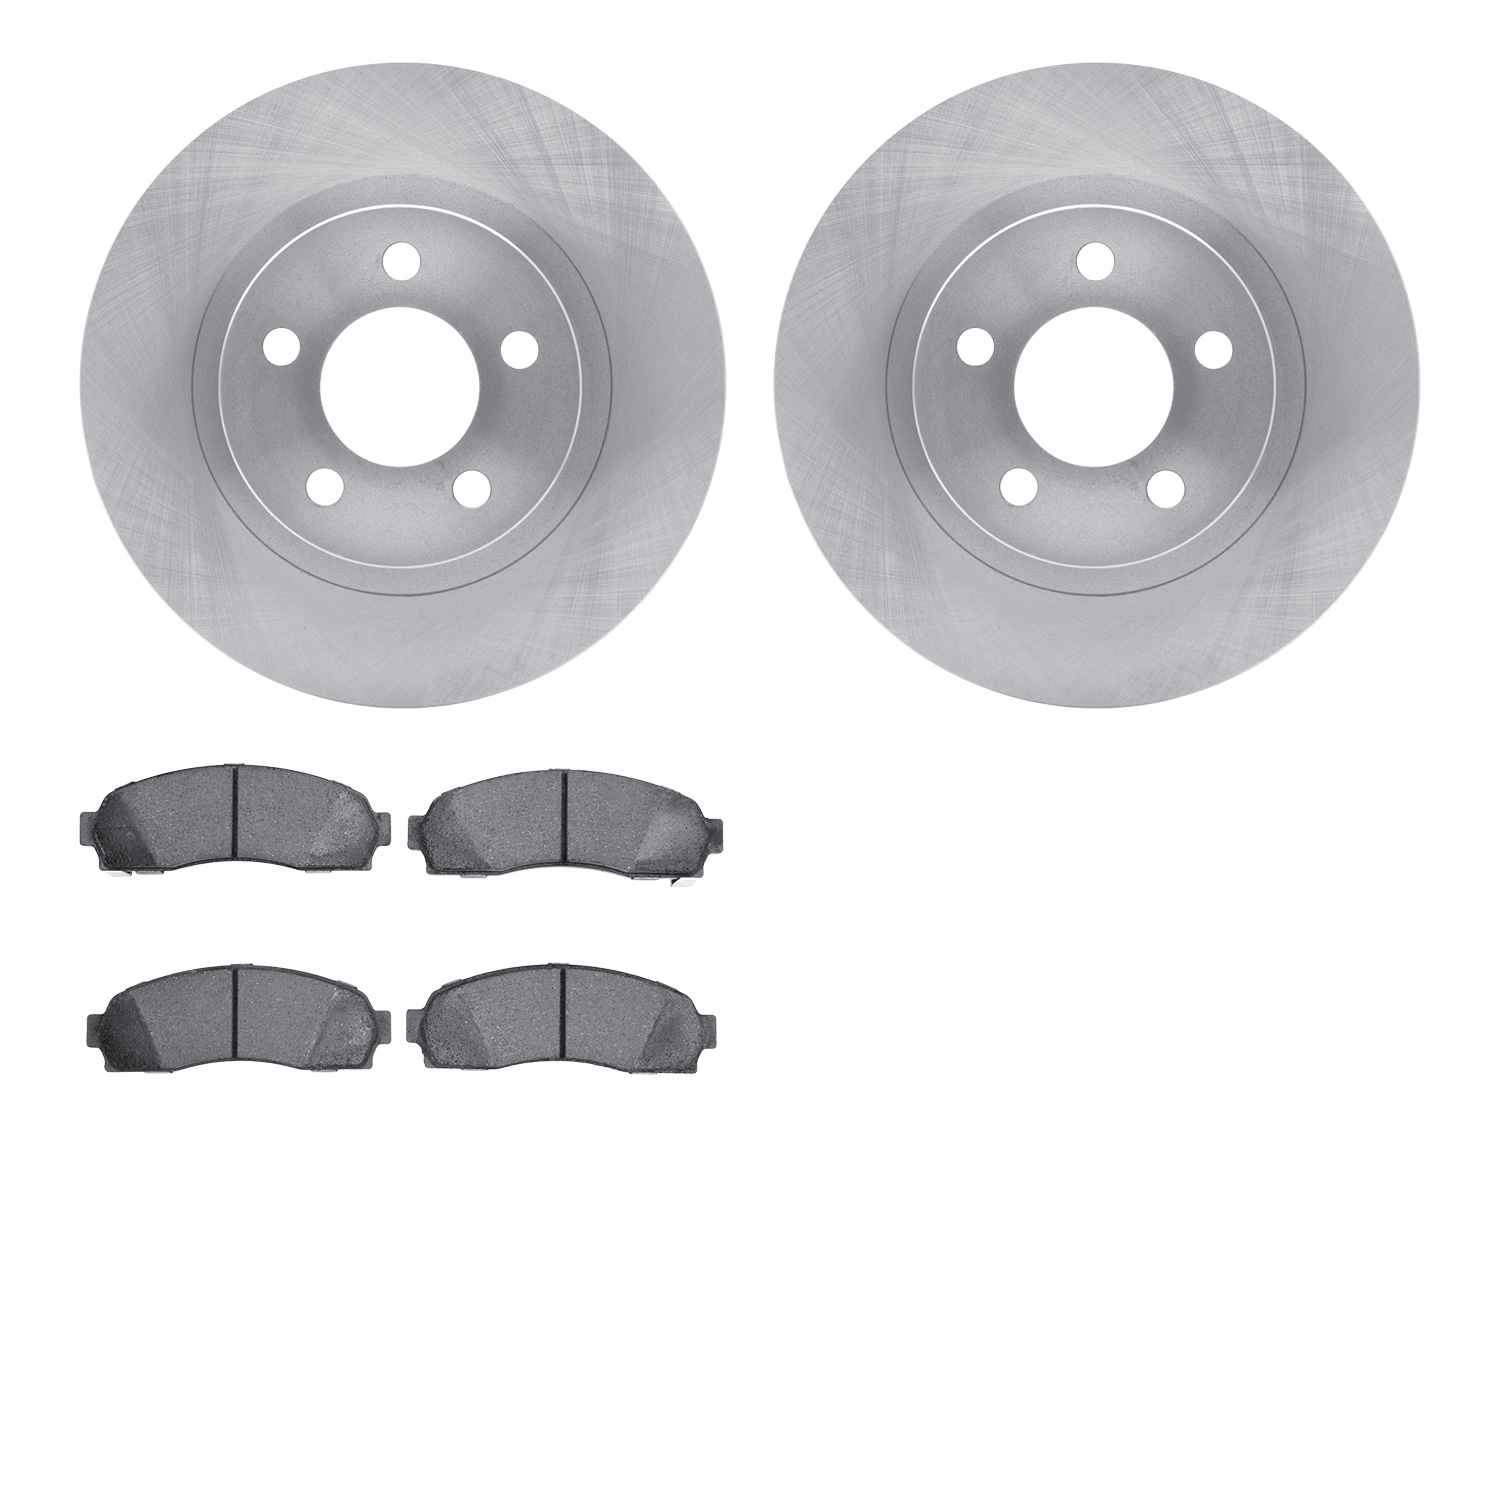 6402-54170 Brake Rotors with Ultimate-Duty Brake Pads, 2001-2011 Ford/Lincoln/Mercury/Mazda, Position: Front